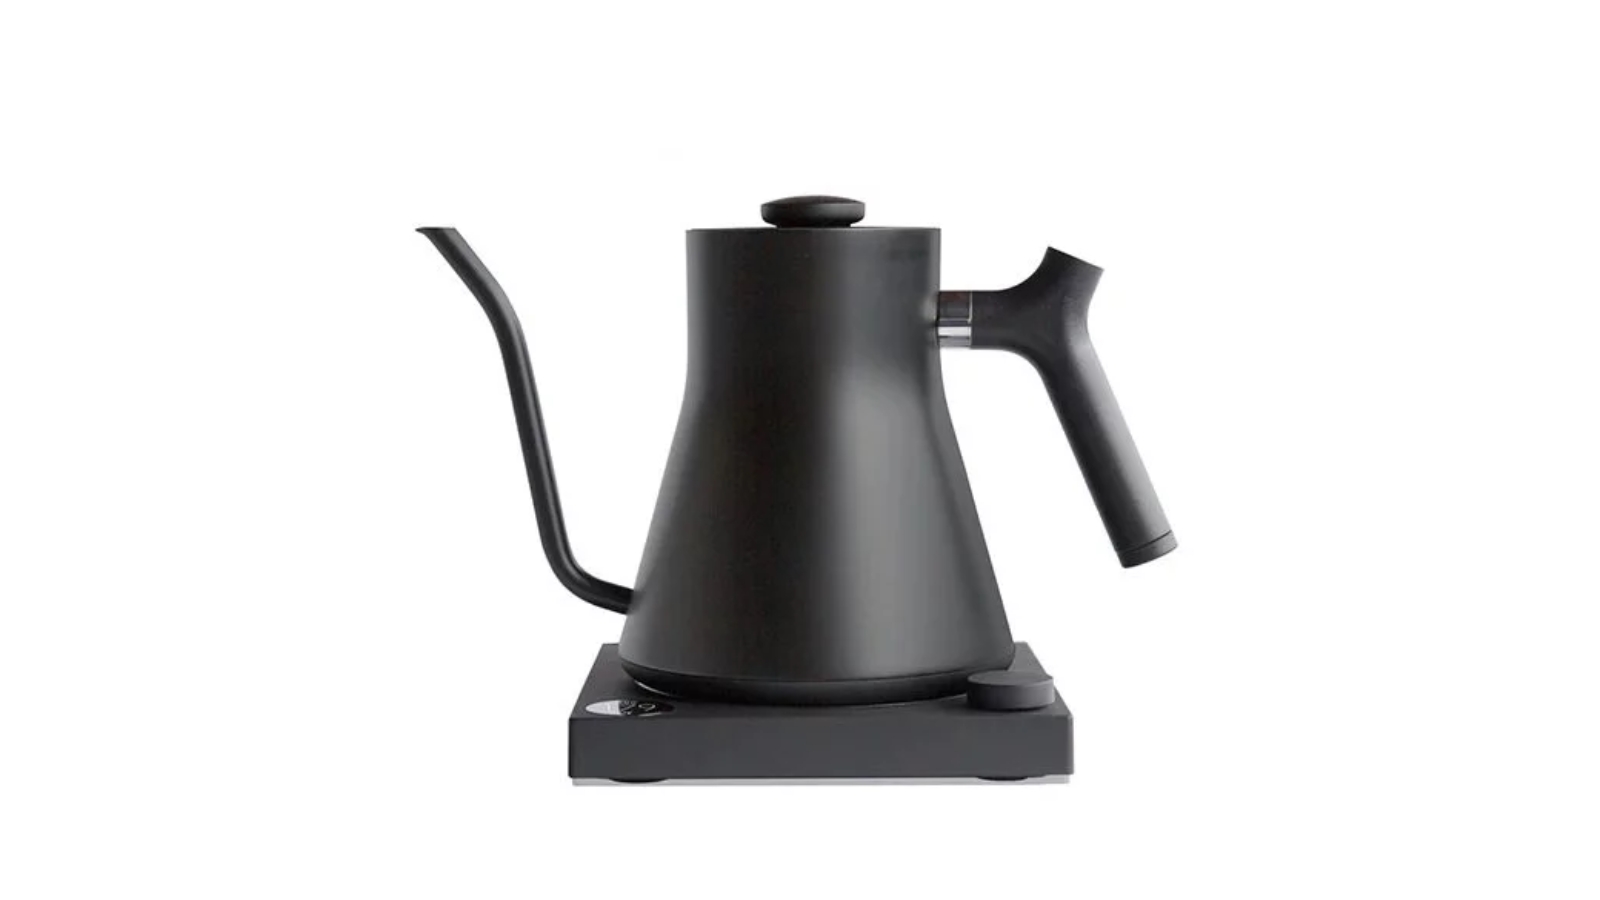 display of a black electric lettle for making coffee or brewing as a beginner